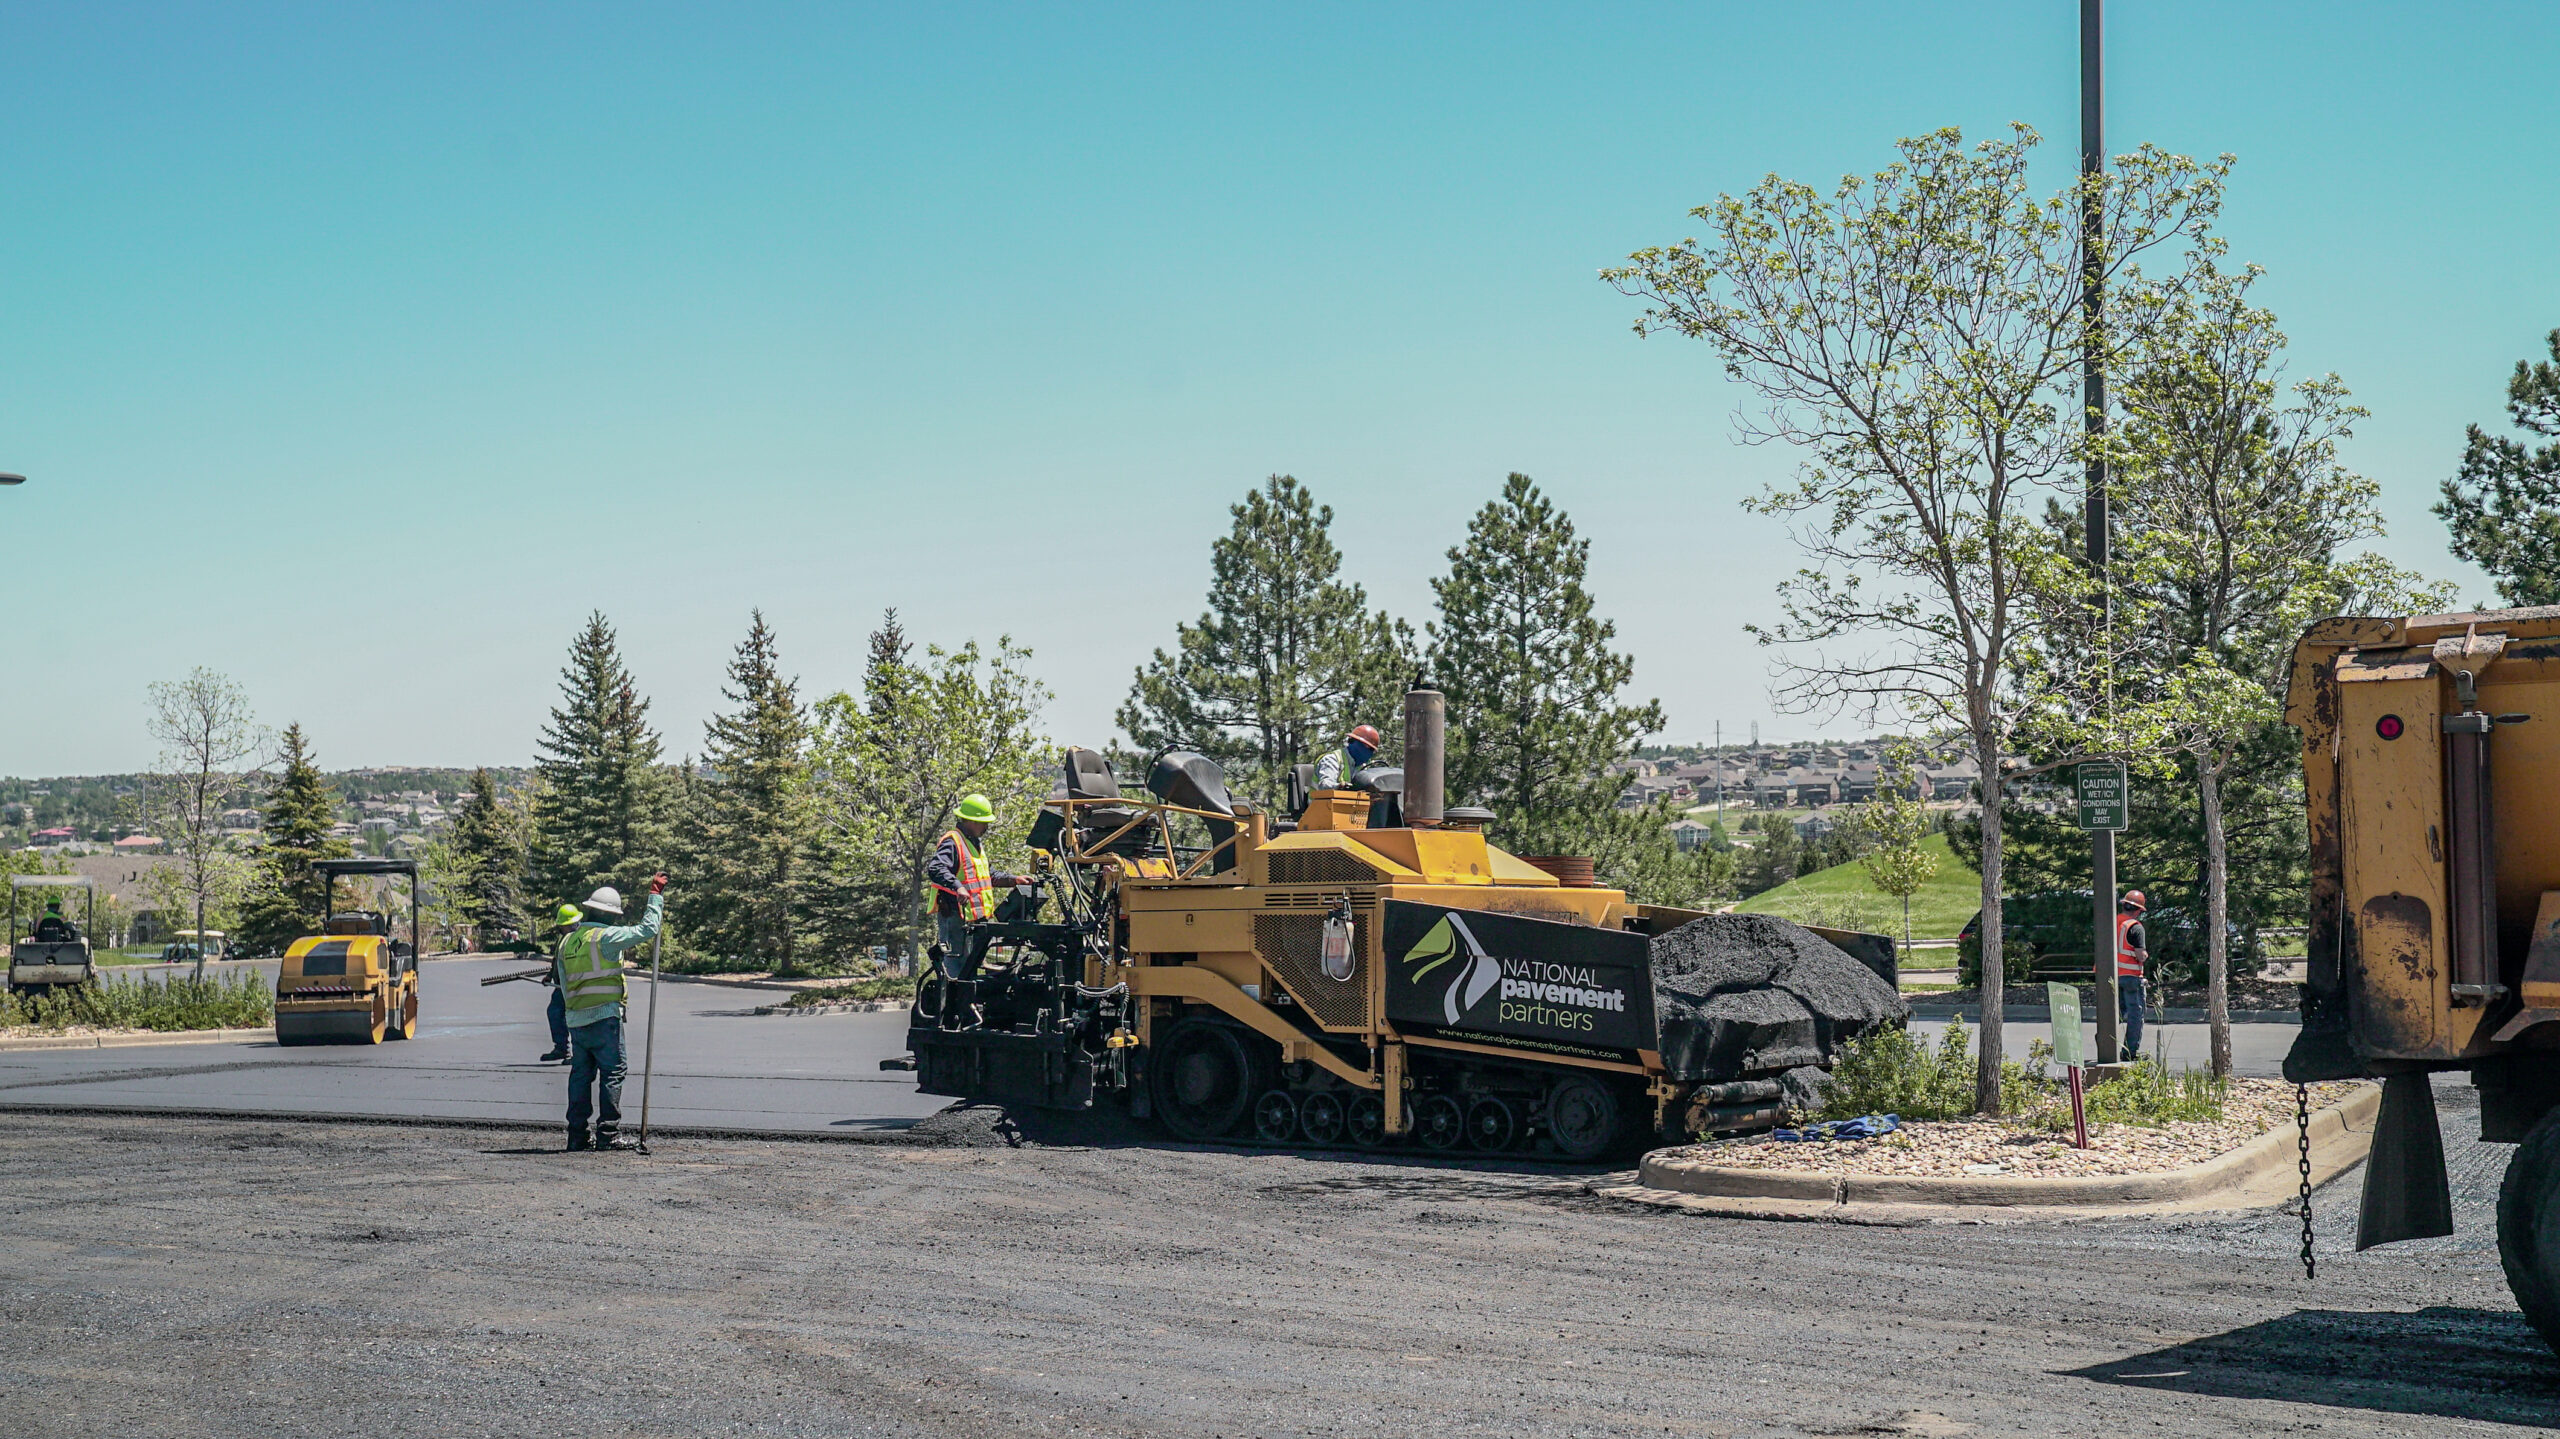 Planning for a commercial paving project